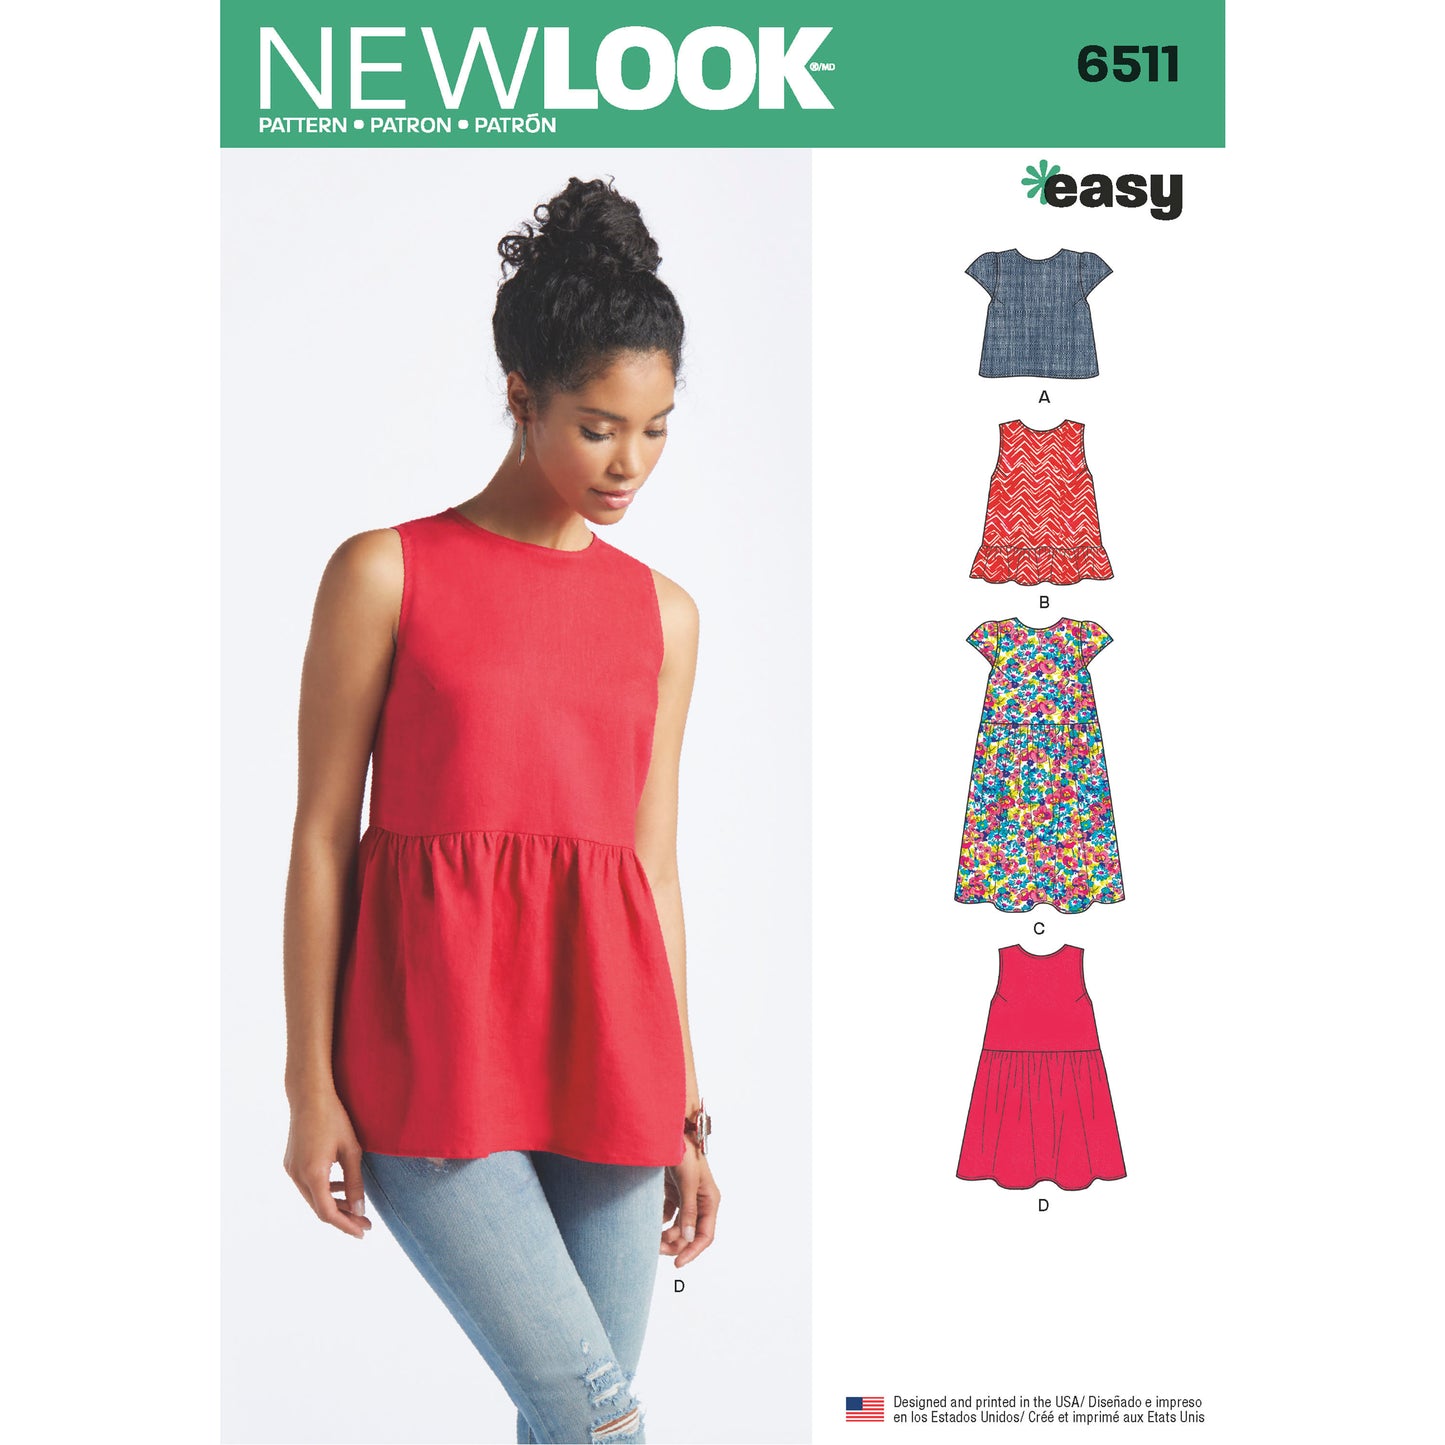 New Look Sewing Pattern 6511 N6511 Misses' Top with Length and Sleeve Variations - You’ve Got Me In Stitches